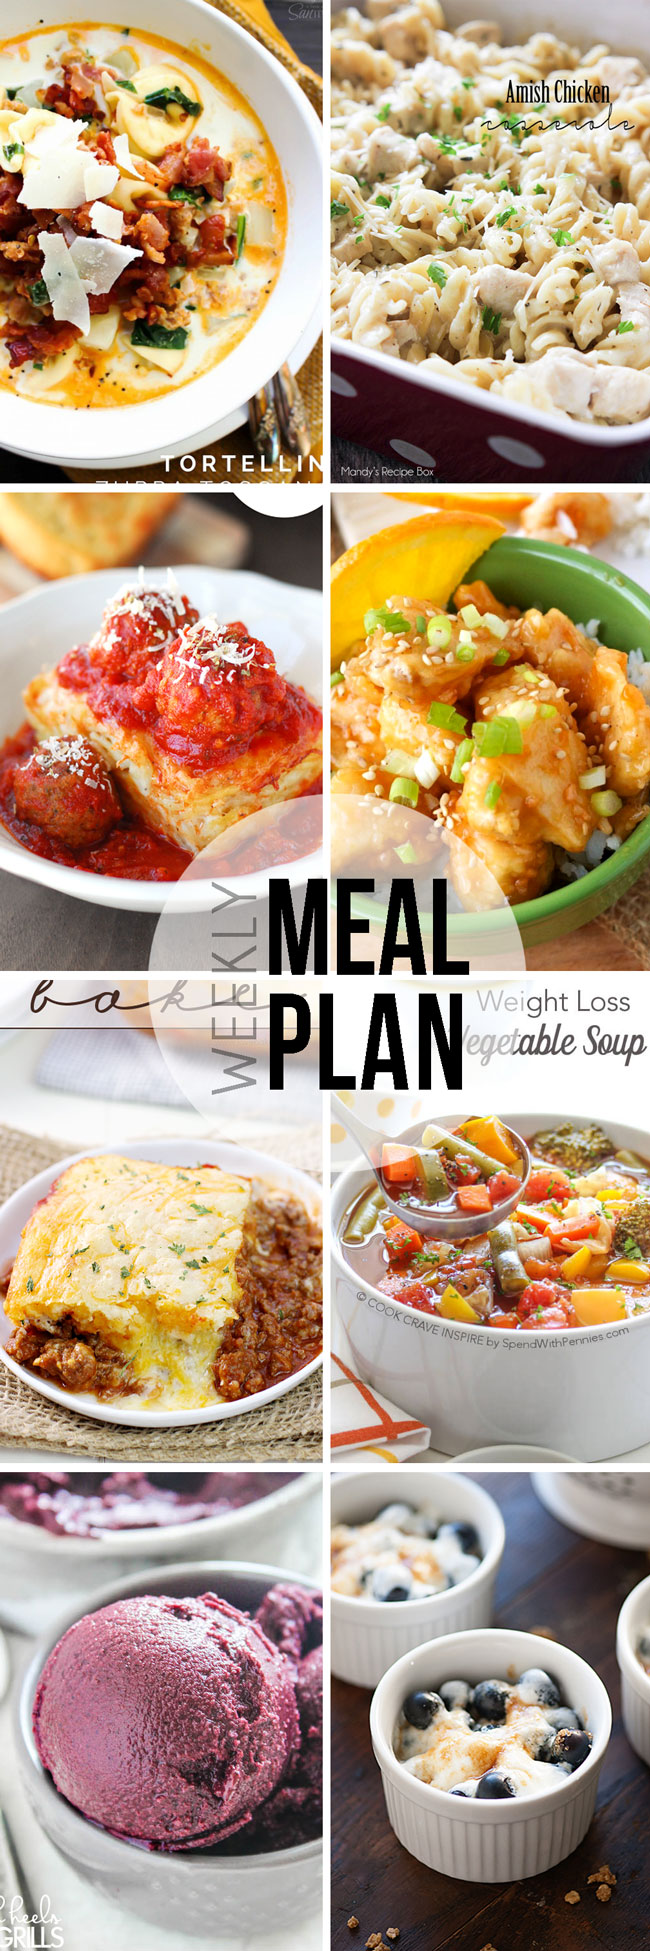 A weekly meal plan to help take the hassle out of feeding your family. 